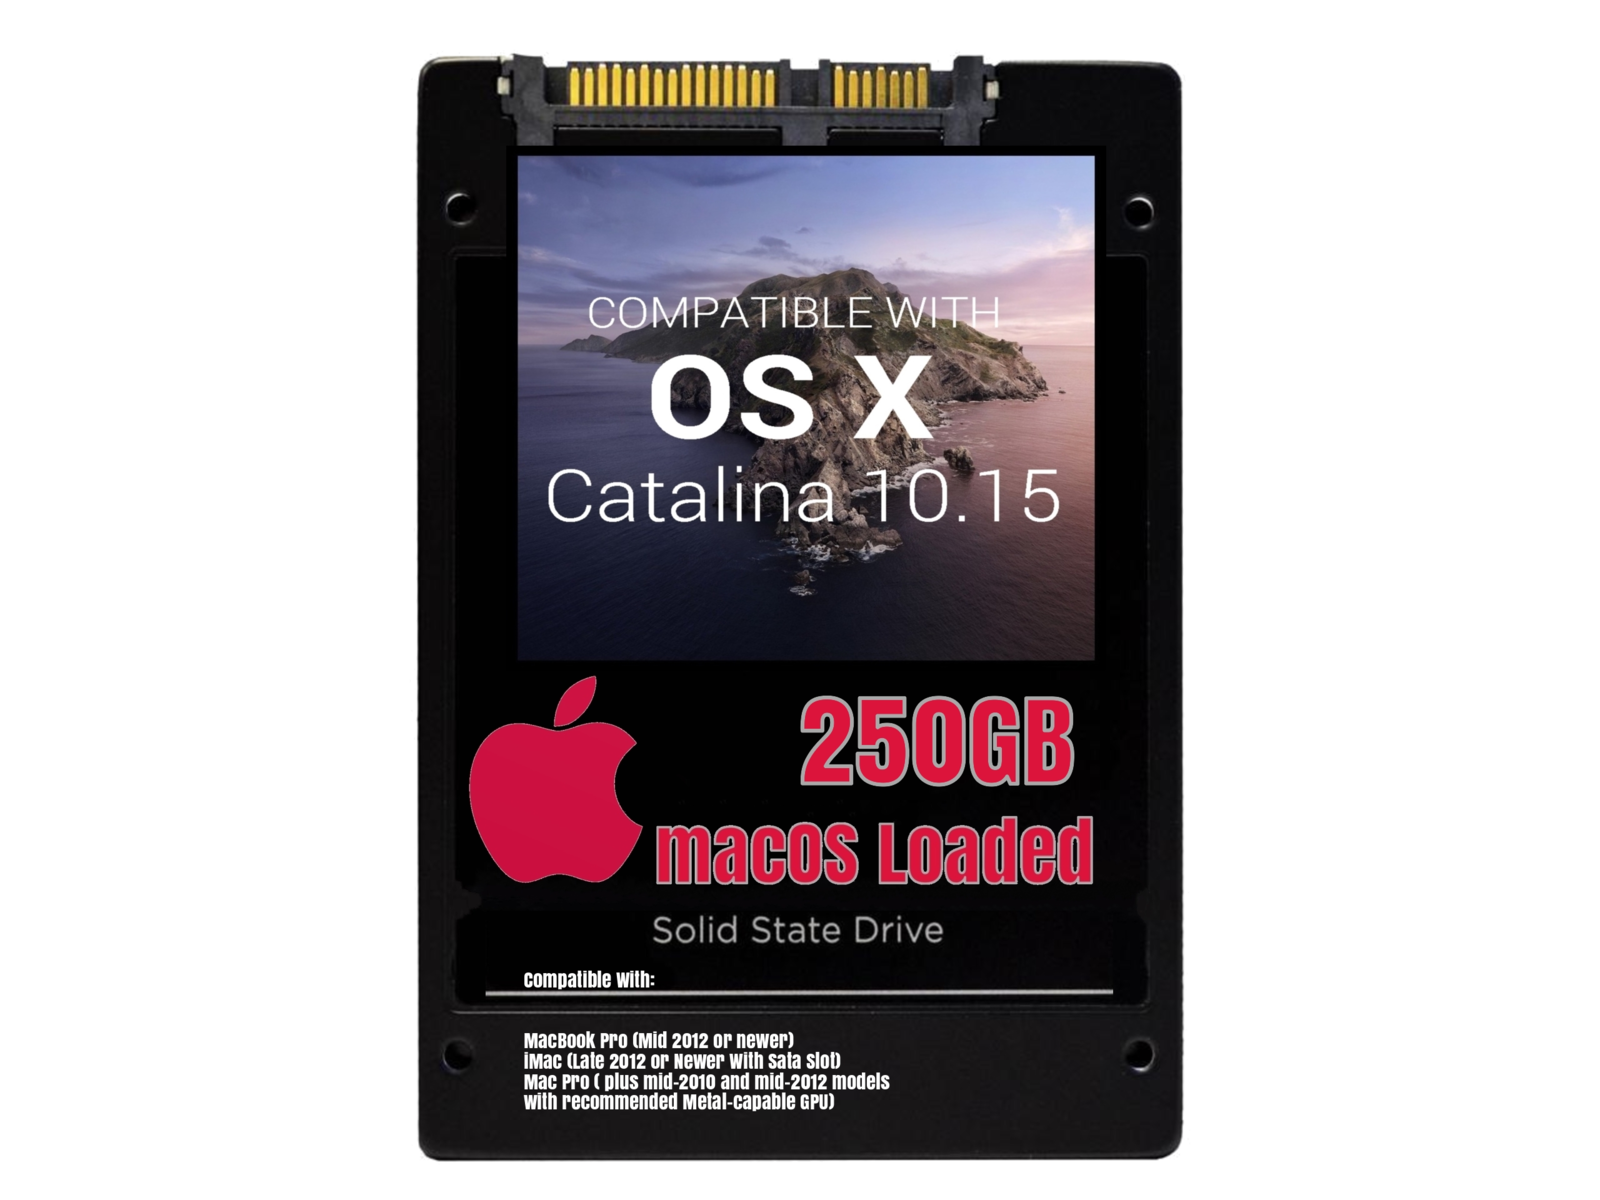 macOS Mac OS X 10.15 Catalina Preloaded on 250GB Solid State Drive - $49.99